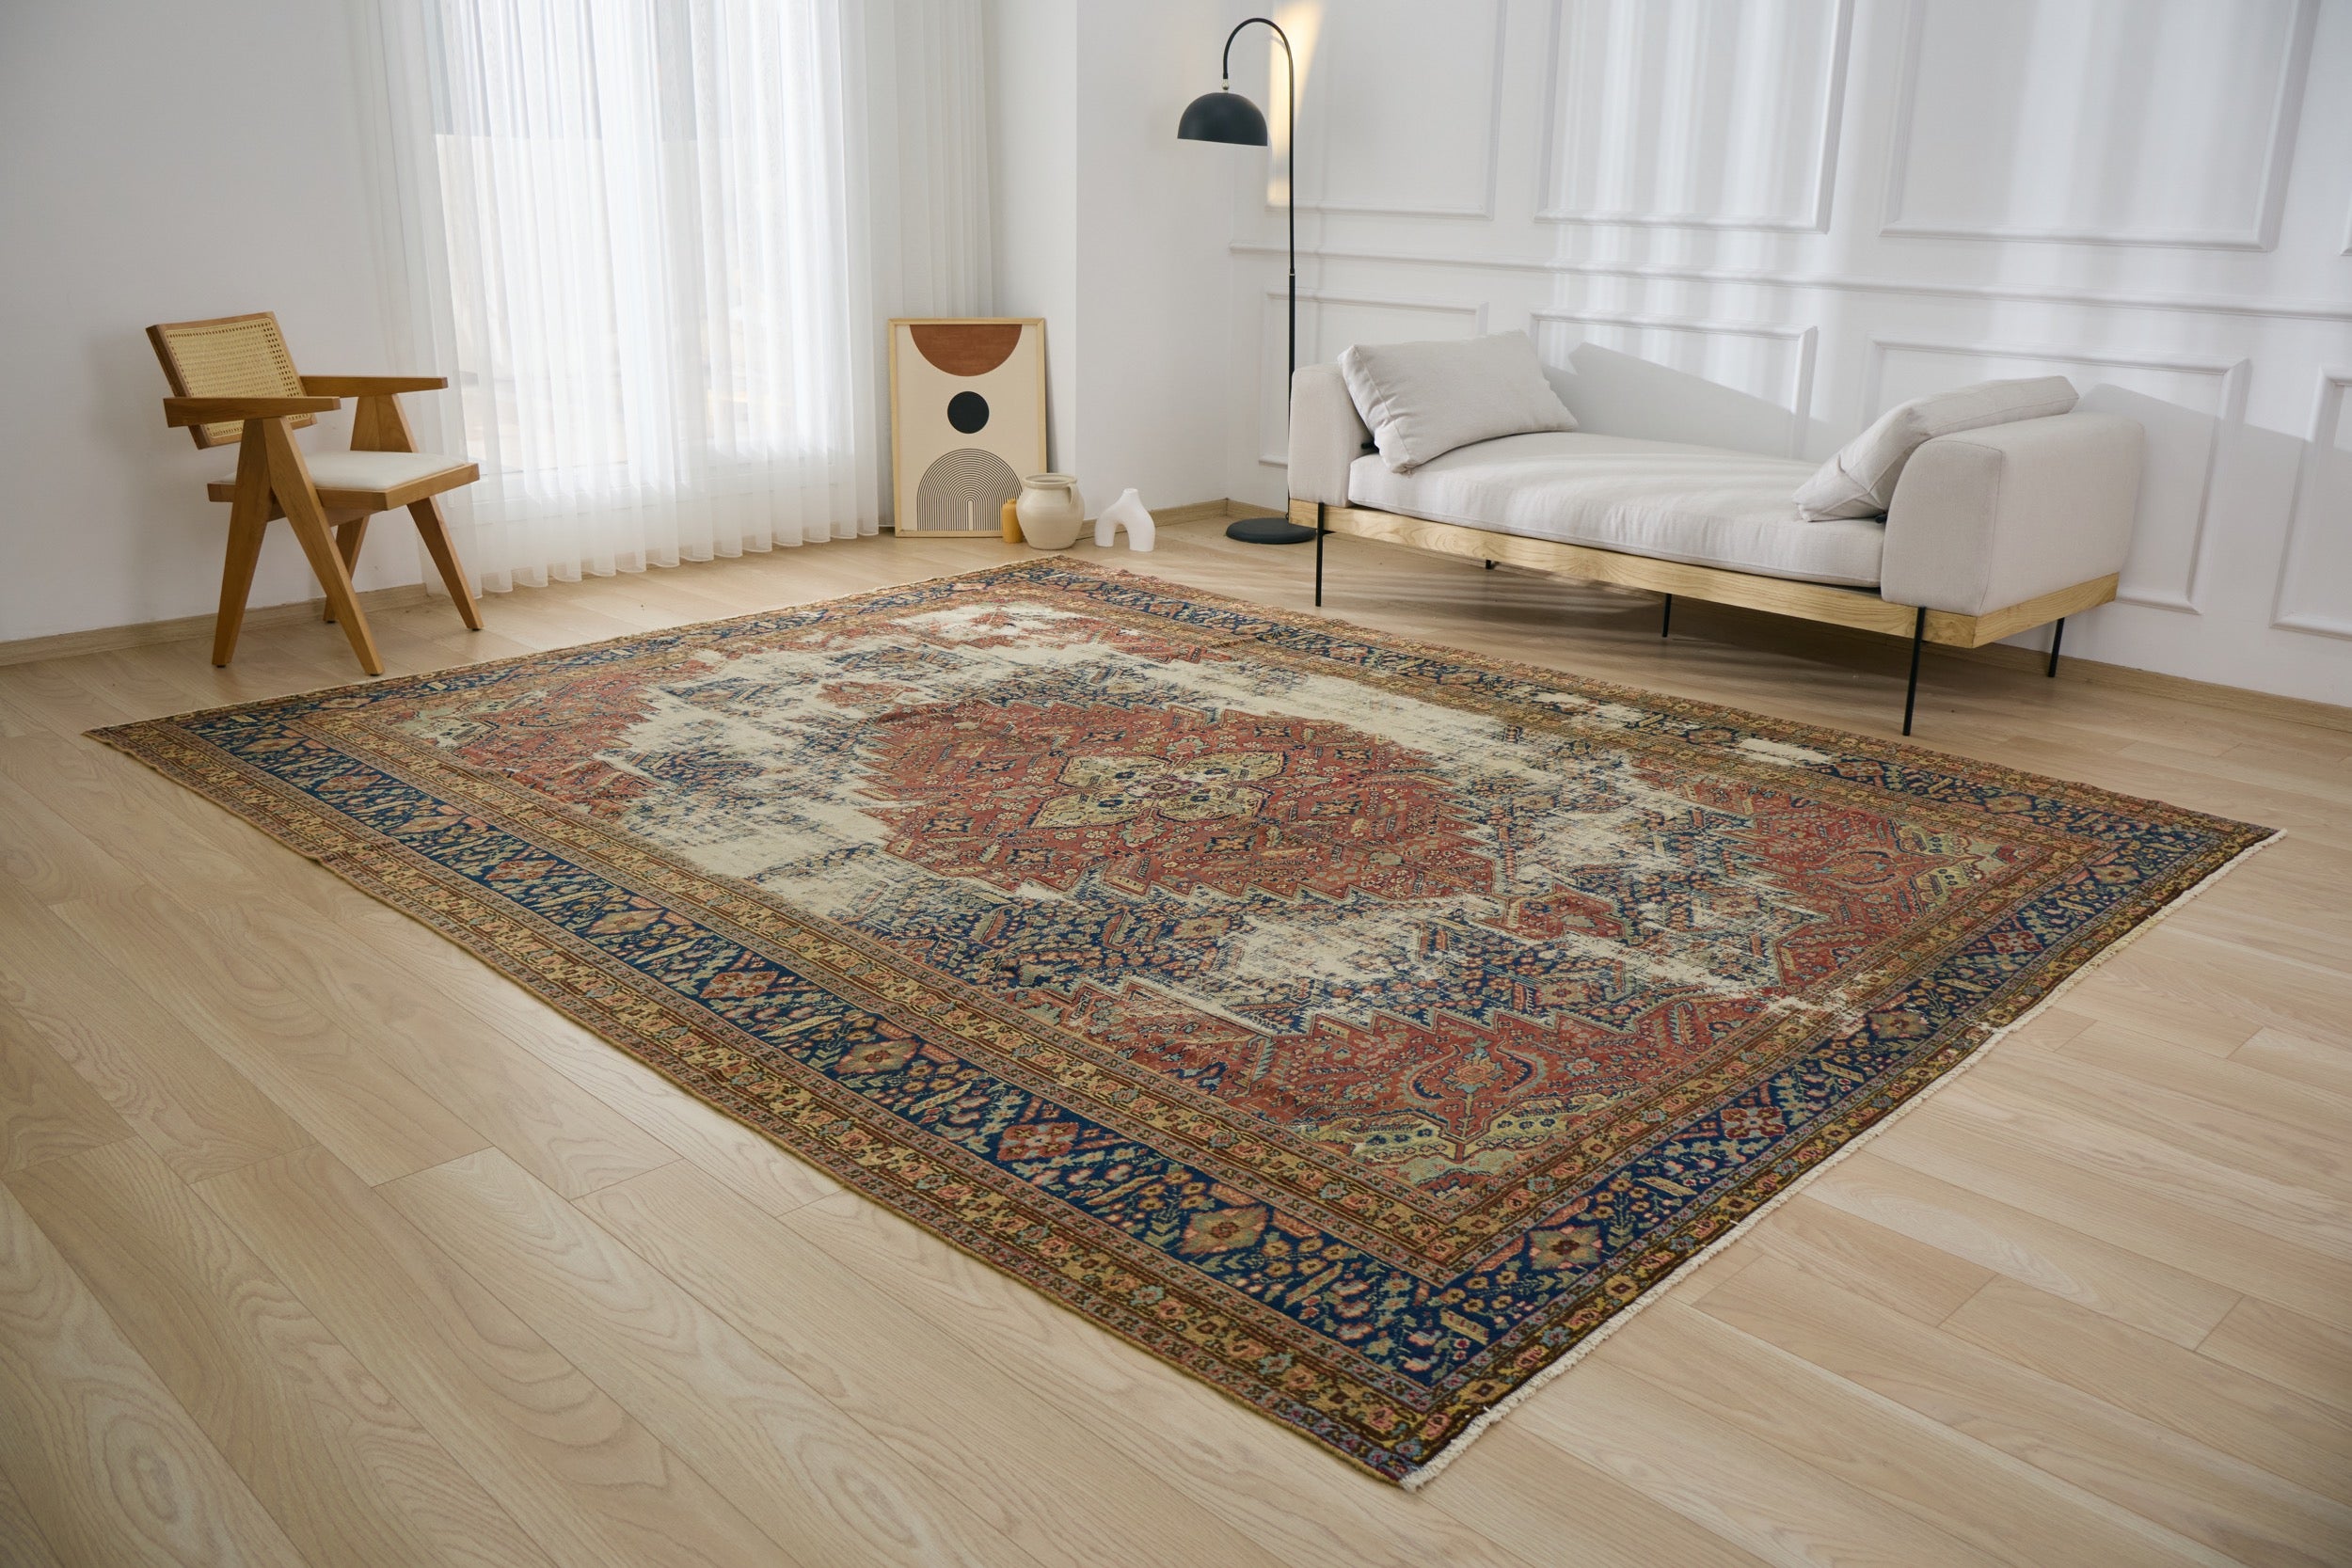 Blayre - The Richness of Red in Oriental Rugs | Kuden Rugs